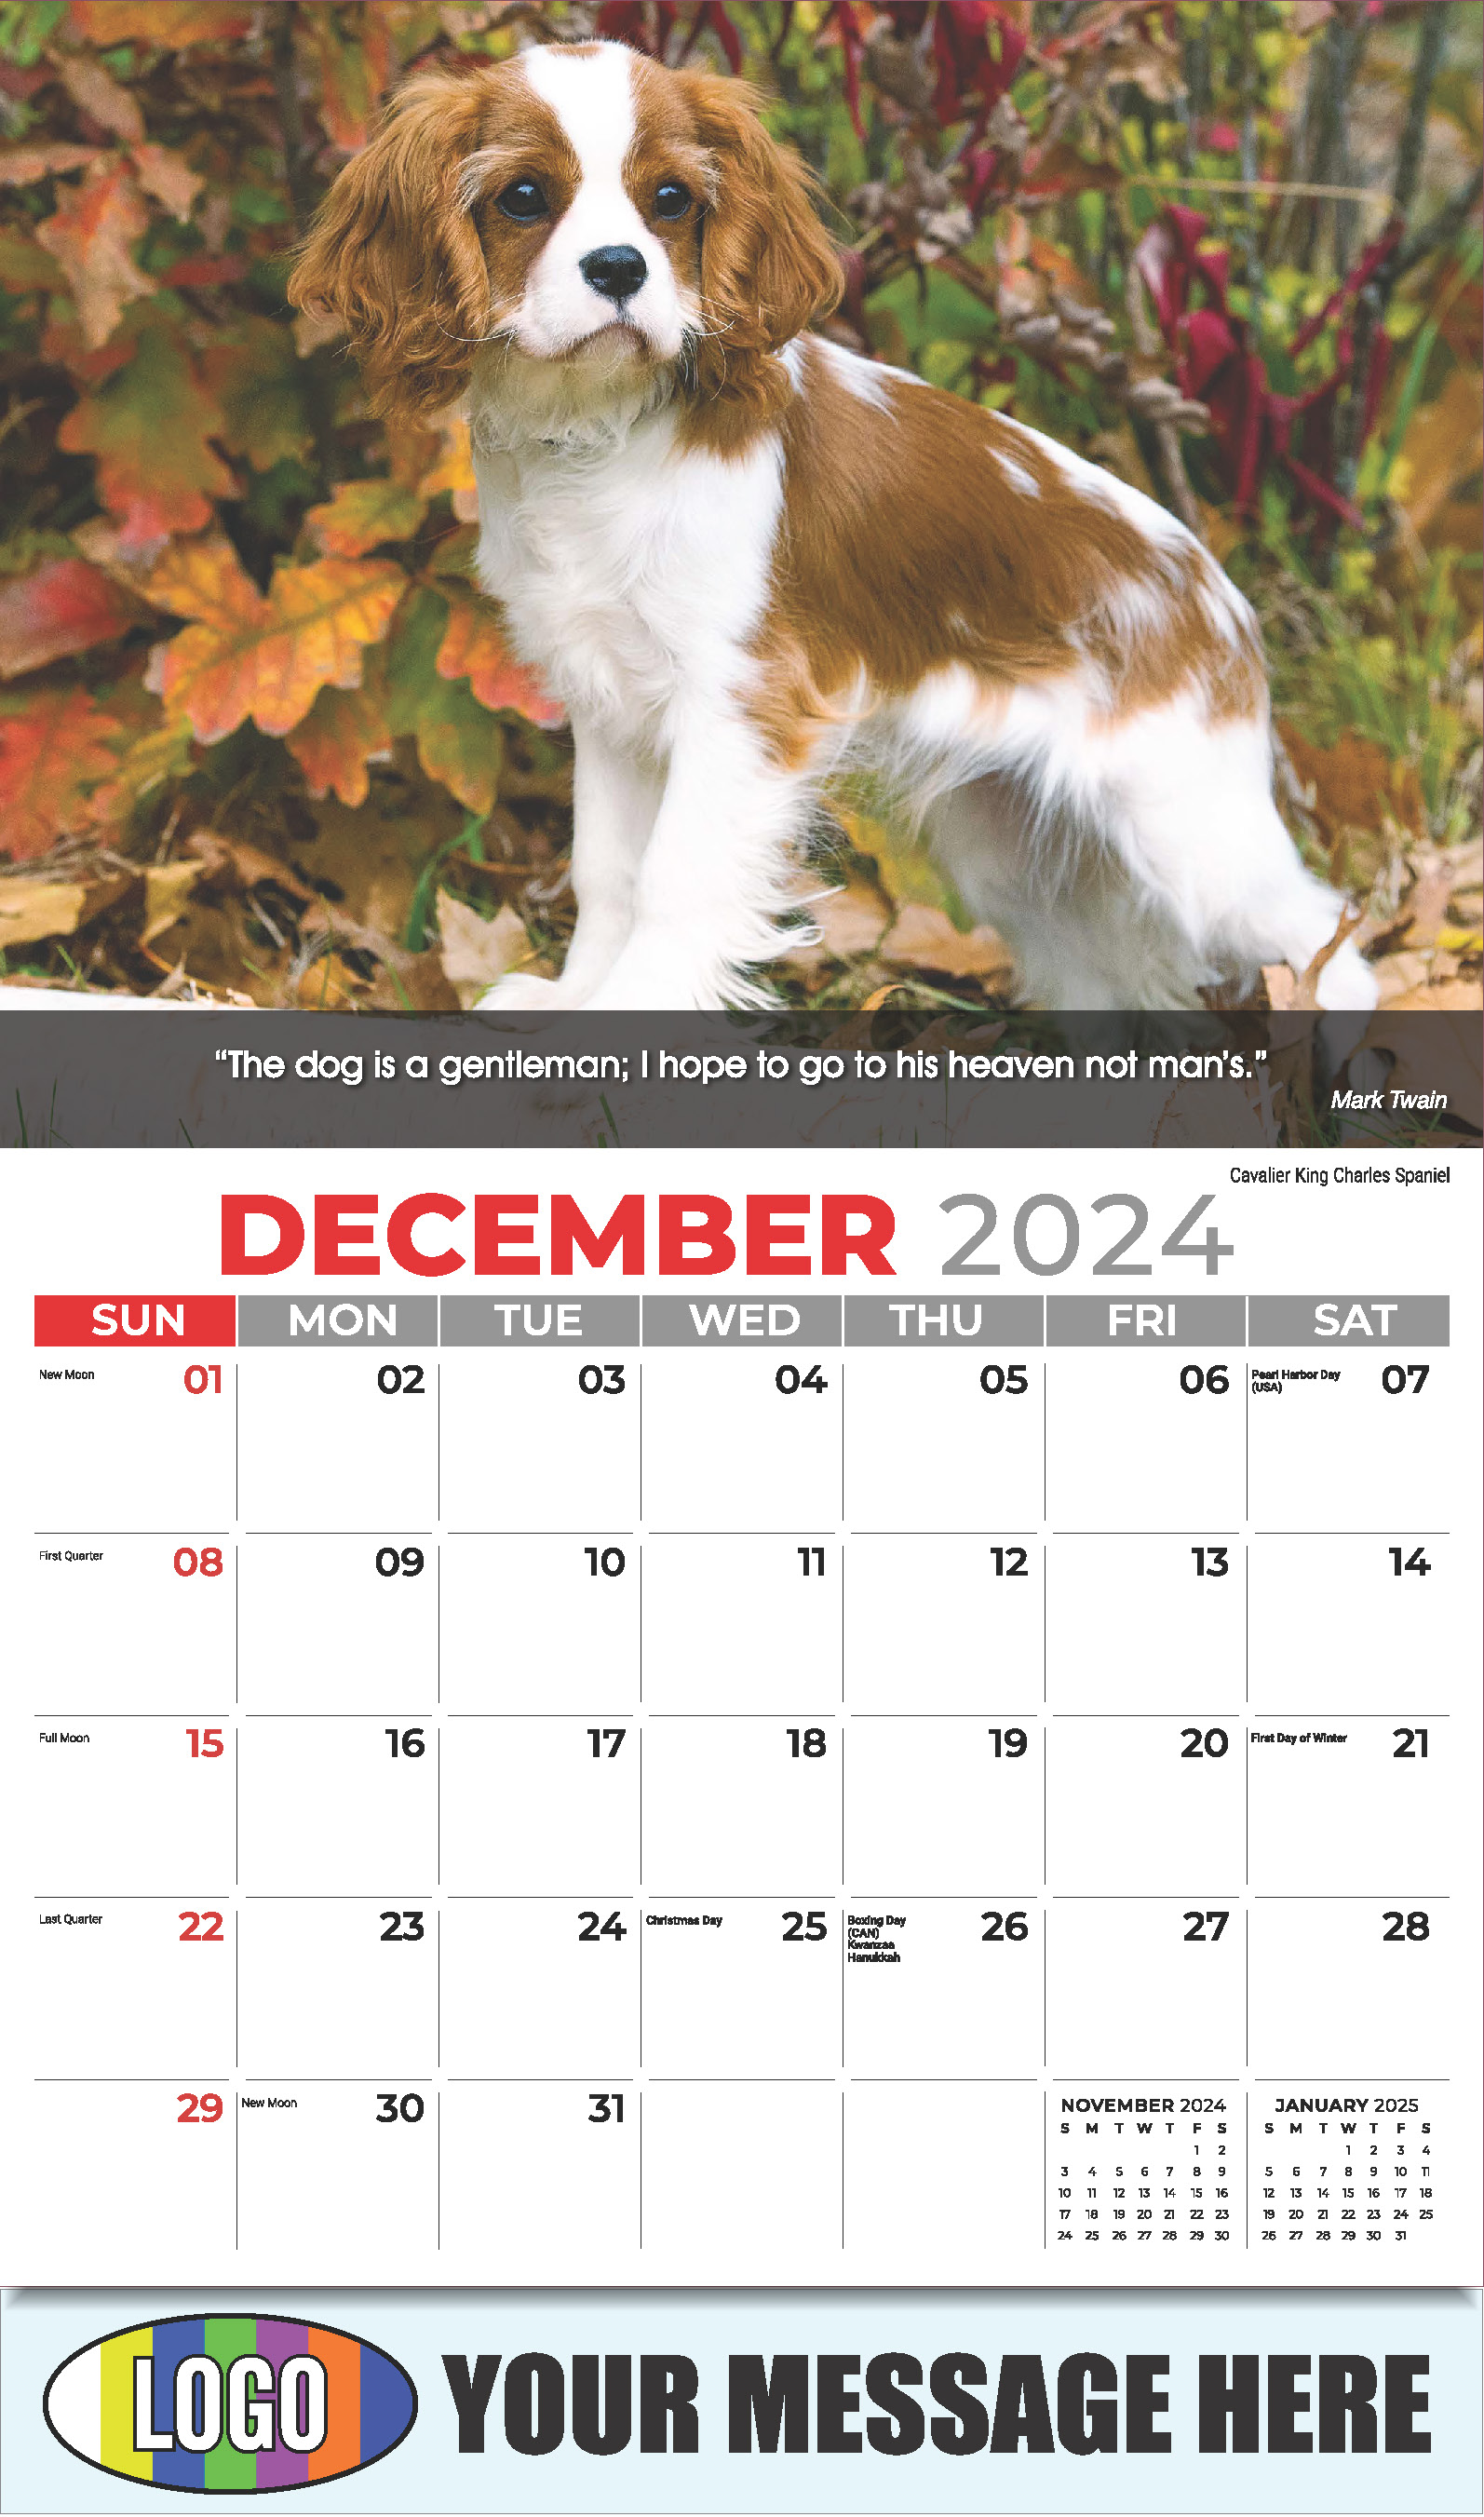 Dogs 2025 Vets and Pets Business Promotion Calendar - December_a